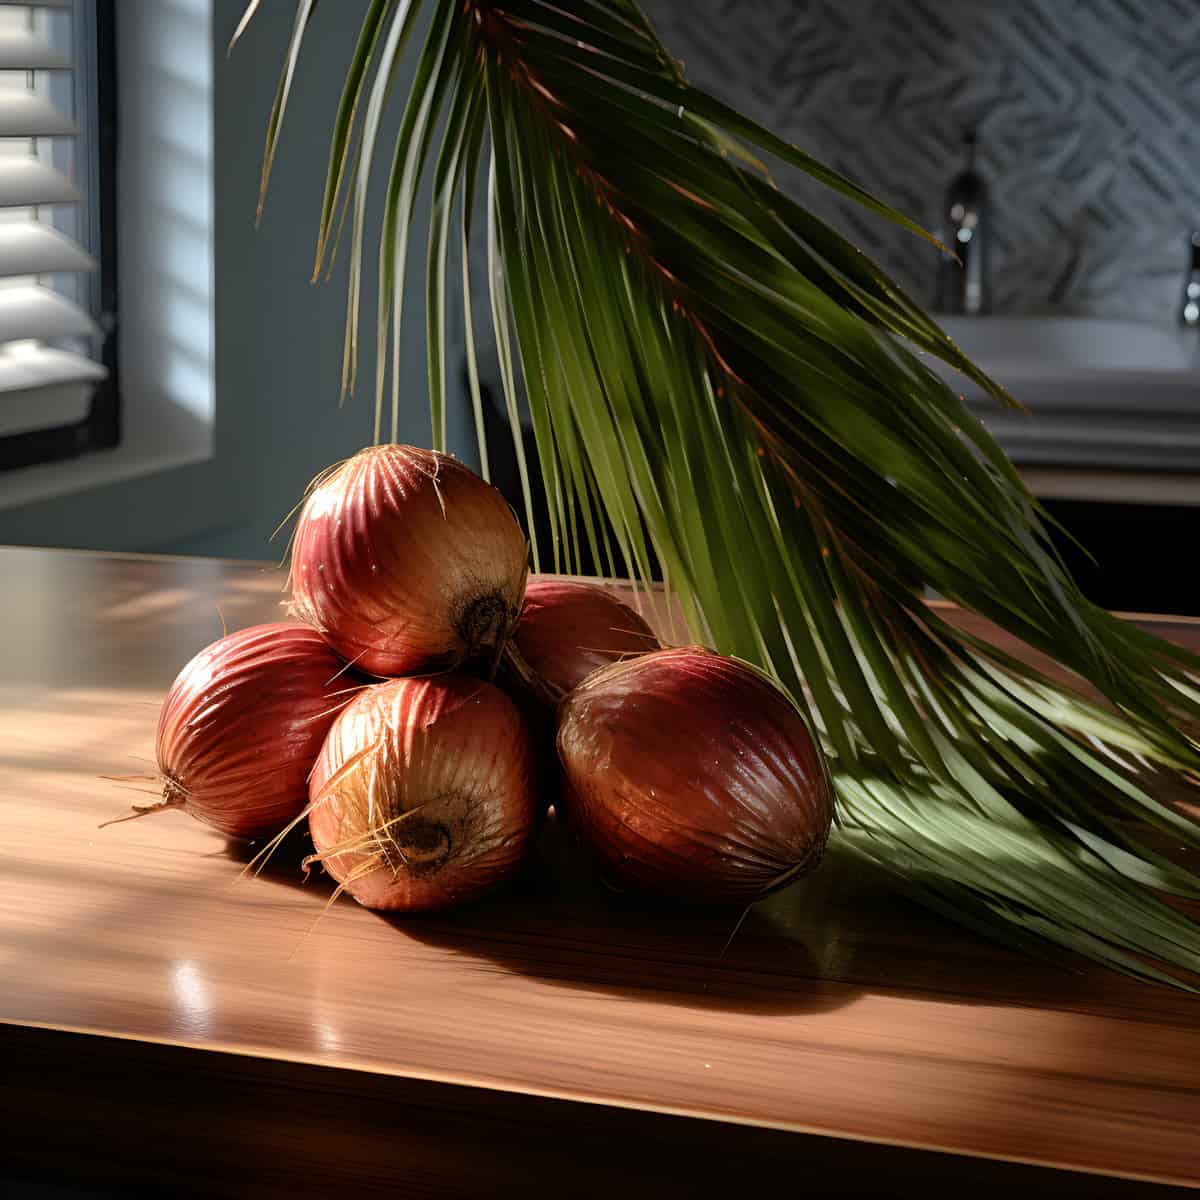 Lala Palm Fruit on a kitchen counter